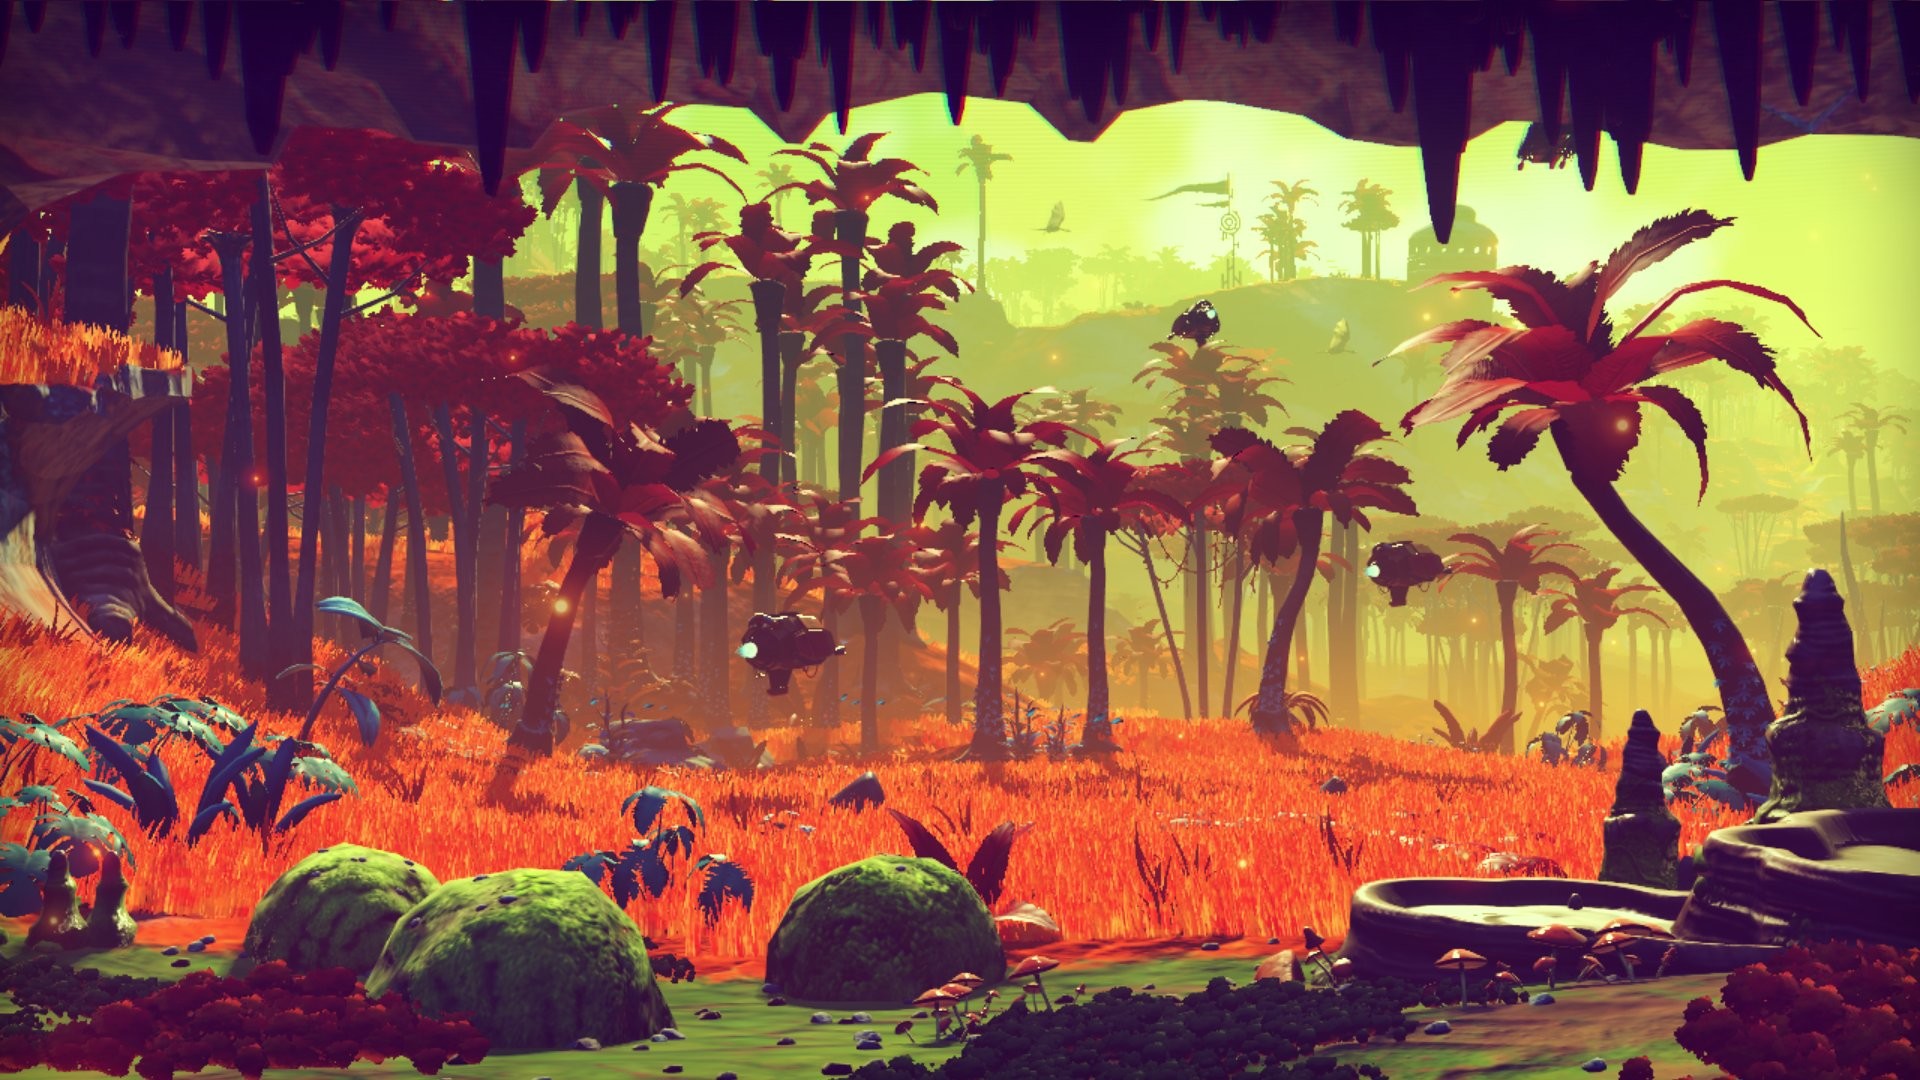 1920x1080 Best 25+ No mans sky release ideas only on Pinterest | No mans sky ps4, No  man's sky game and No man's sky